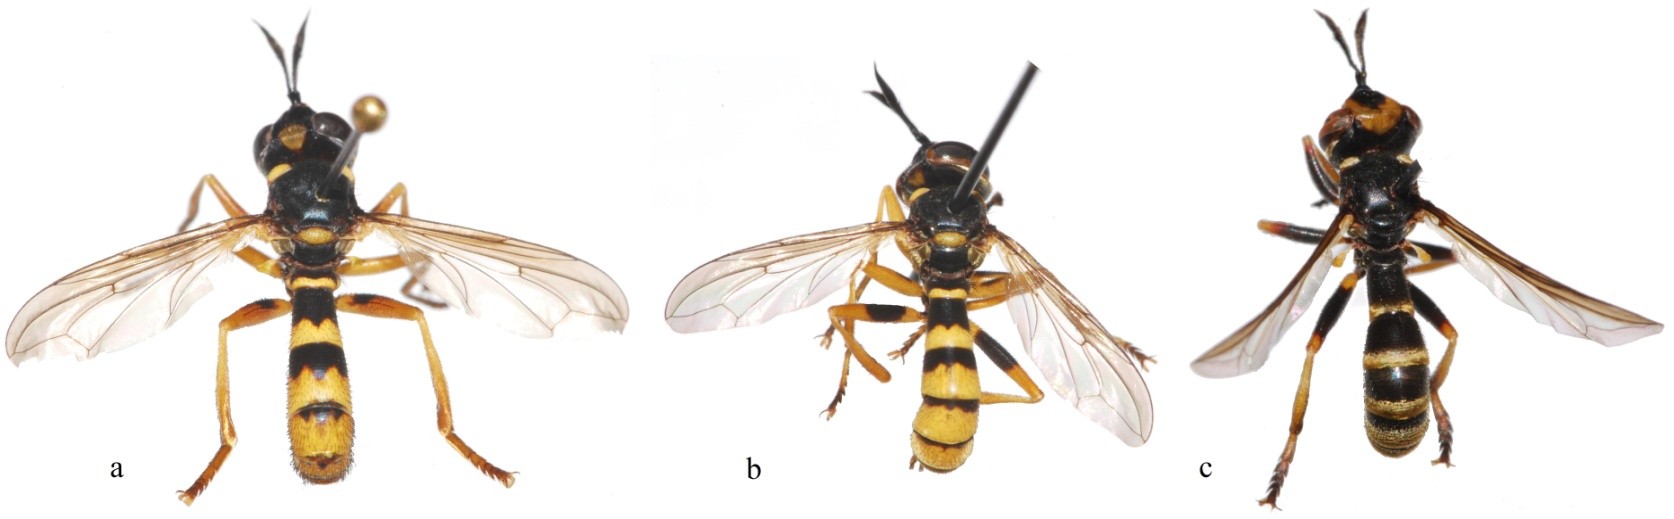 The dominant group of flies visiting ivy flowers were hoverflies and the most numerous species were Eristalis pertinax, Eristalis tenax and Myathropa florea (20 collected specimens), which were